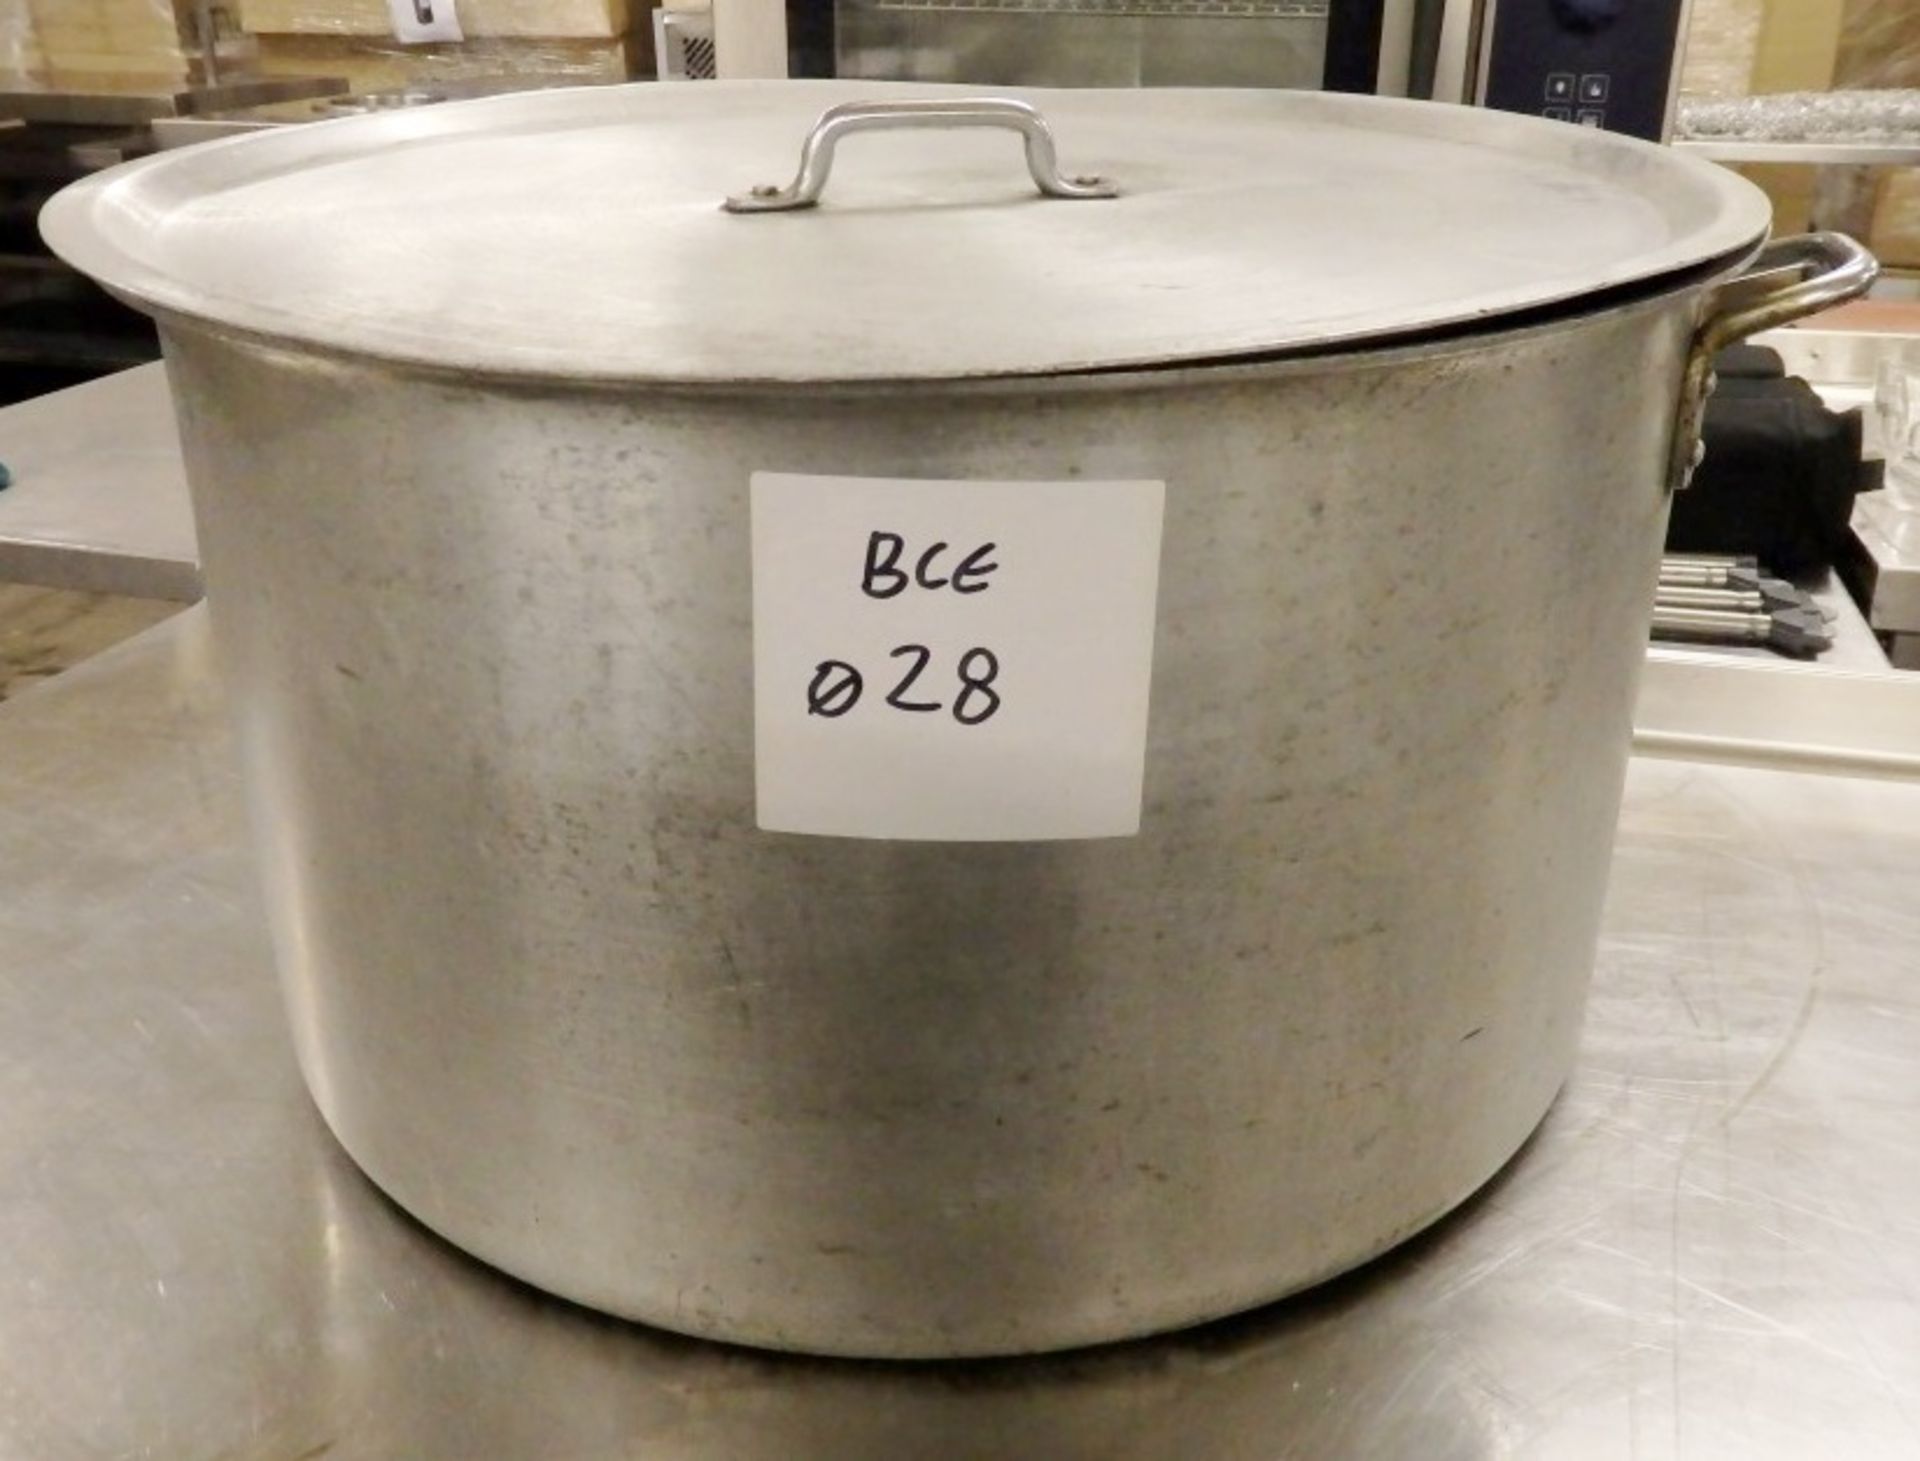 1 x Large Stainless Steel Cooking Pot With Lid - Dimensions: H34 x Diameter 57cm - Ref: BCE028 -